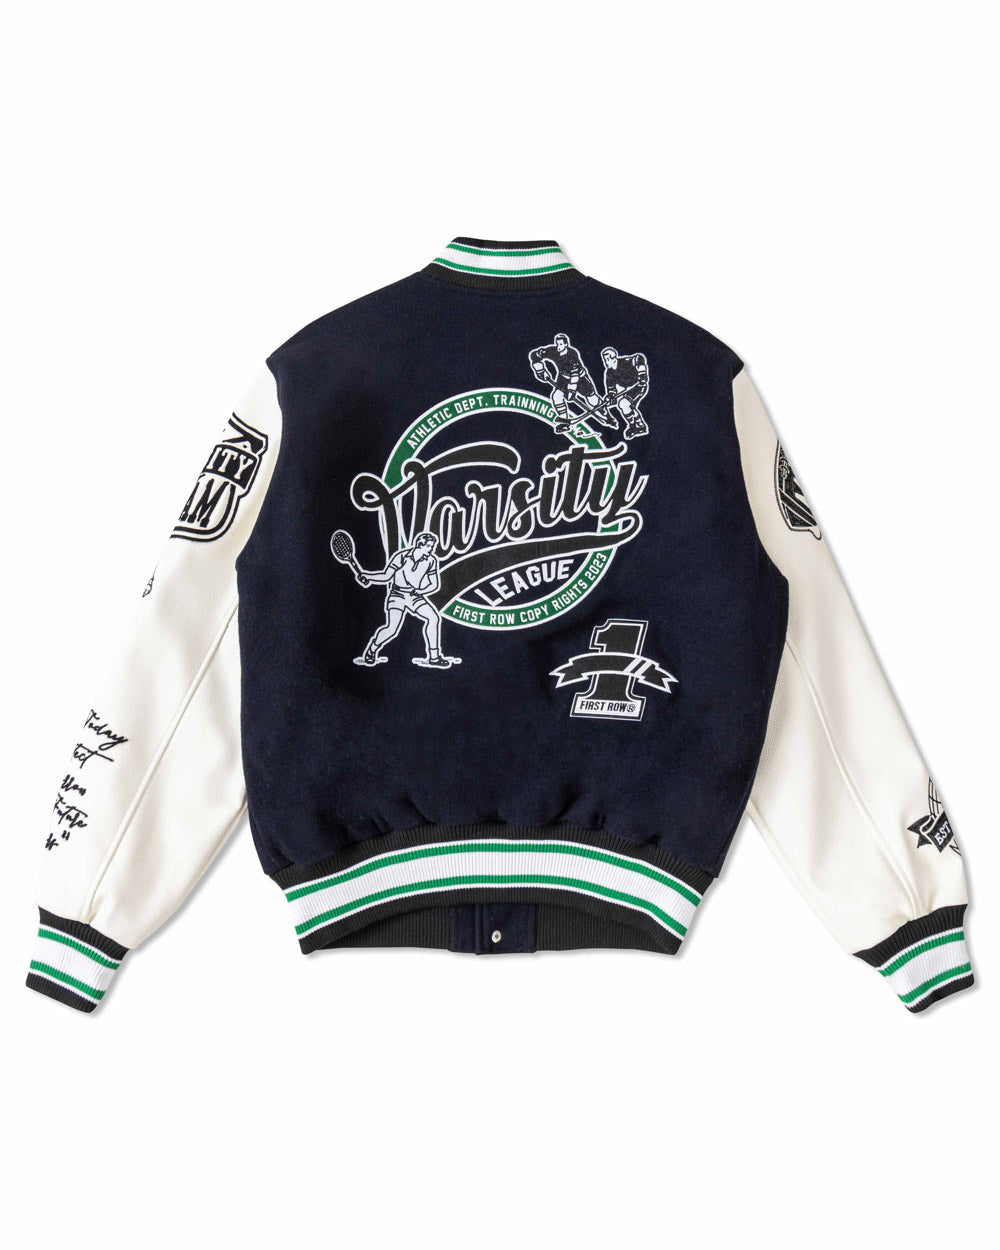 FIRST ROW - ALL FIELD THE BEST NEVER REST VARSITY JACKET